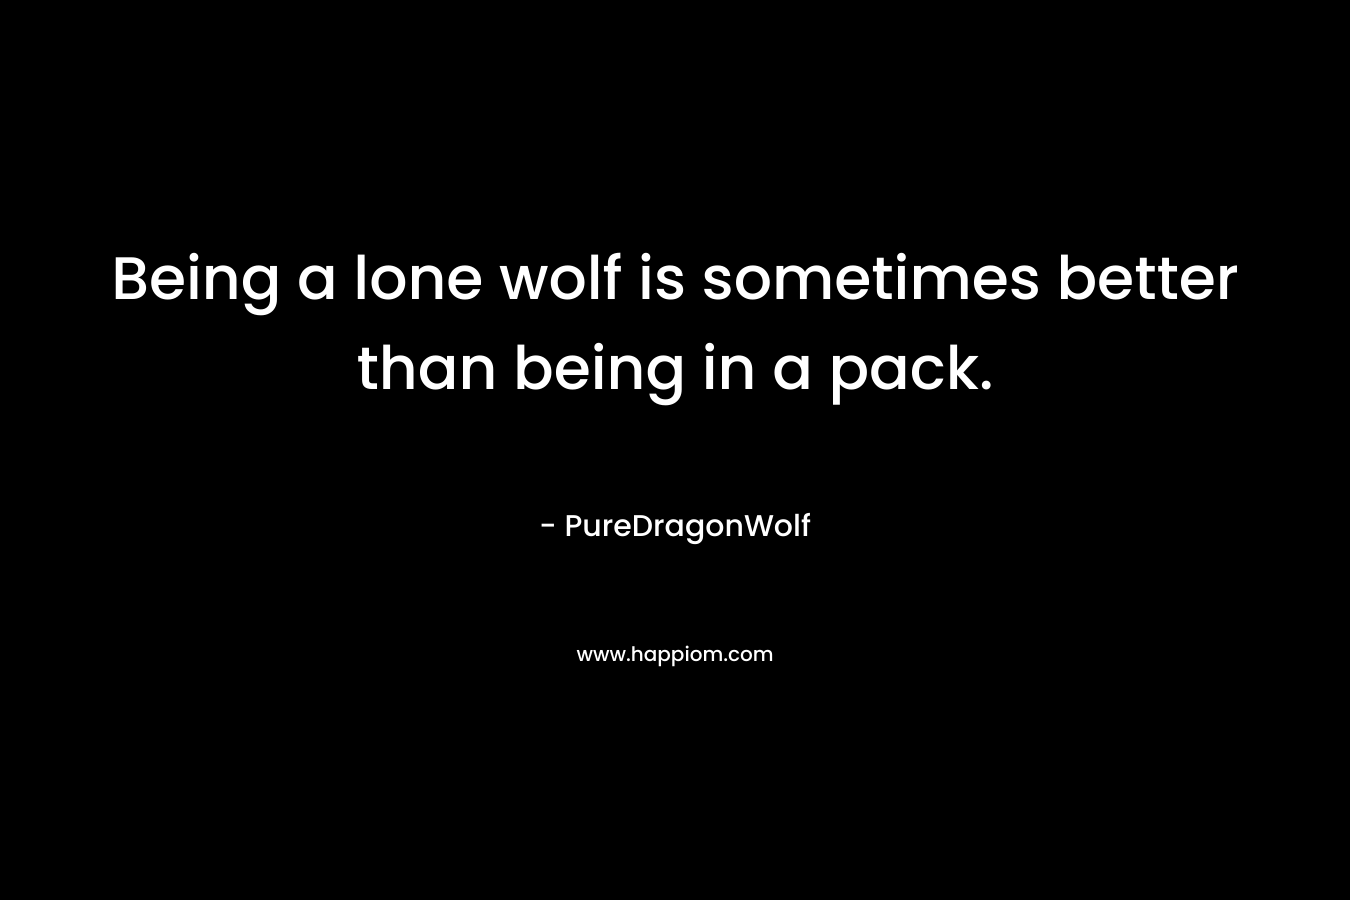 Being a lone wolf is sometimes better than being in a pack. – PureDragonWolf